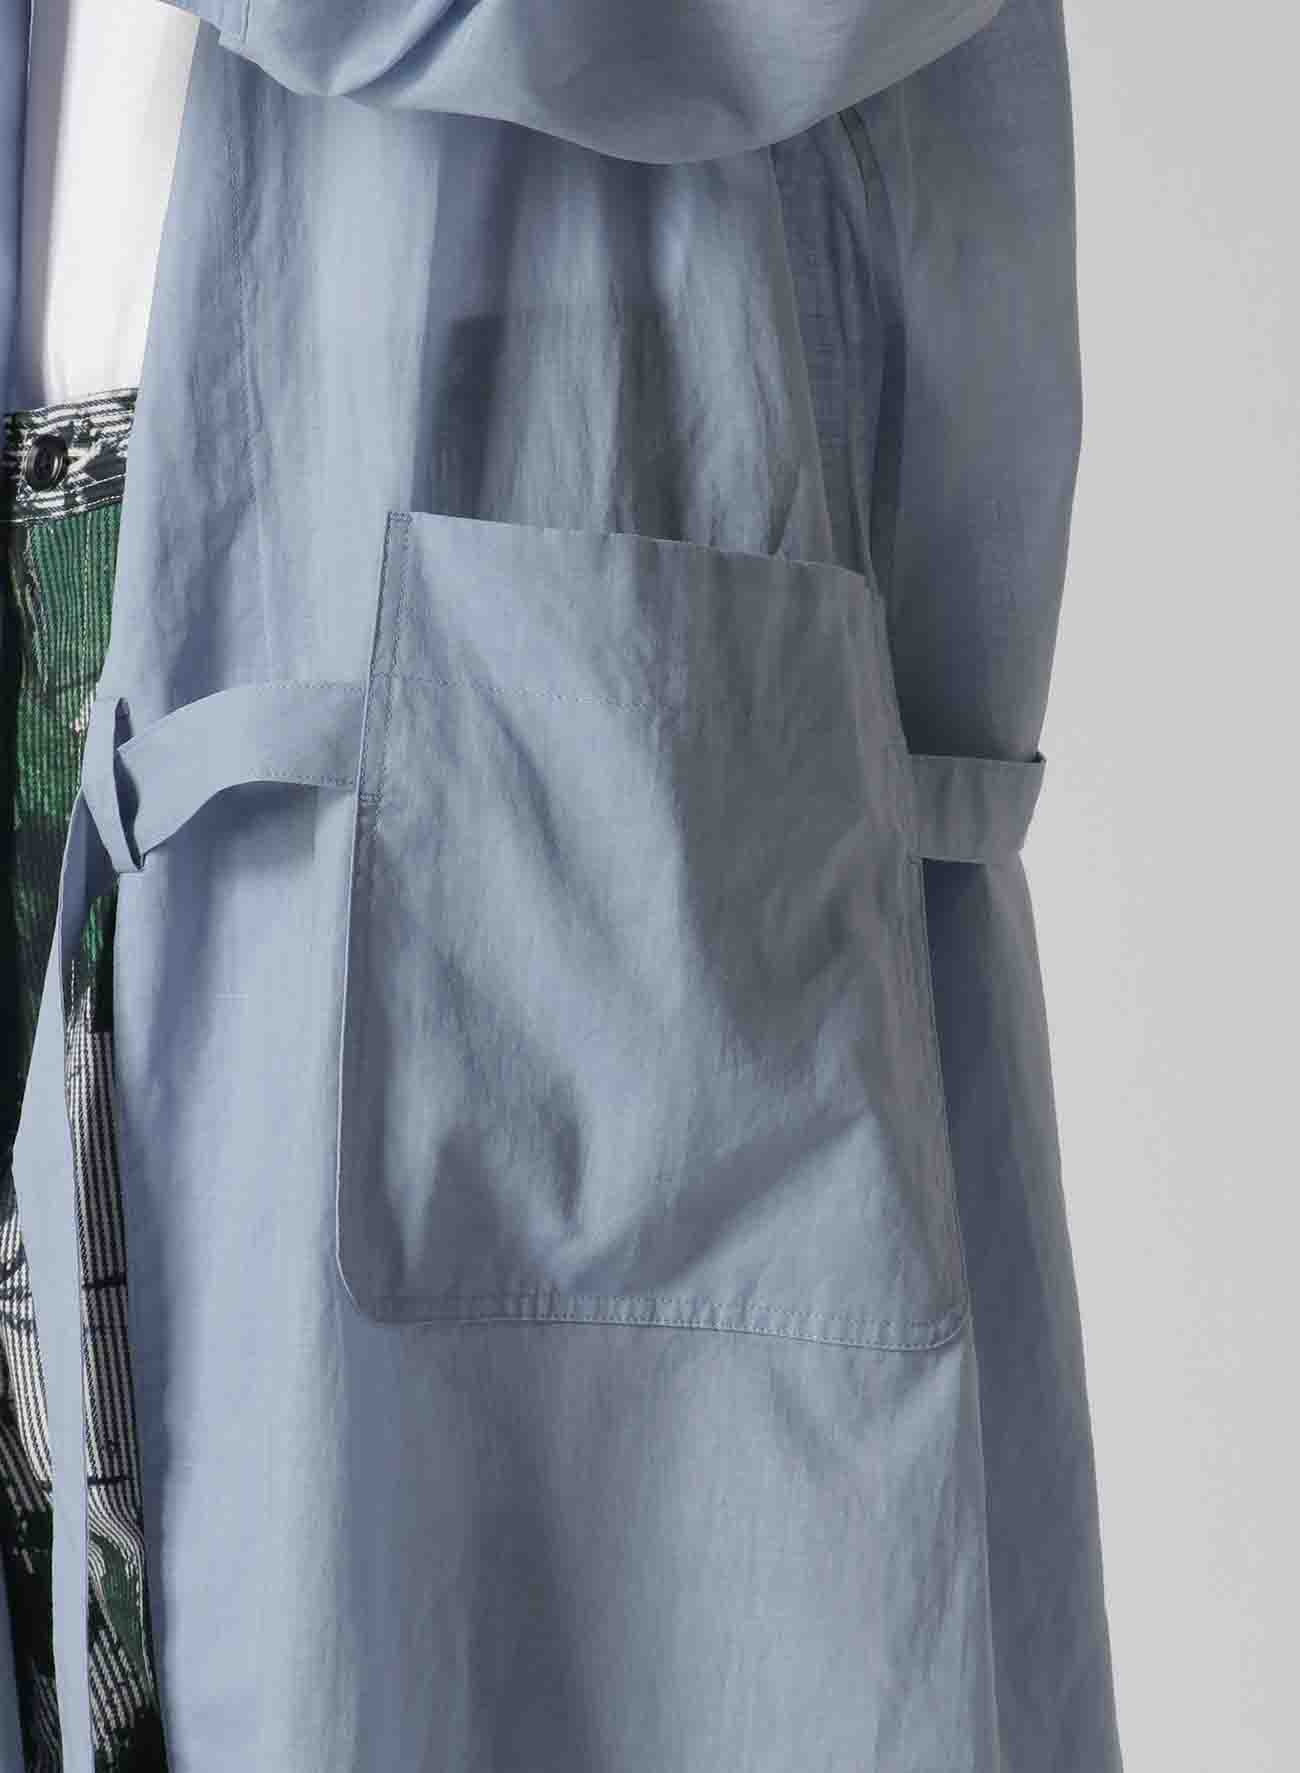 RAMIE OIL LAWN SURGICAL GOWN